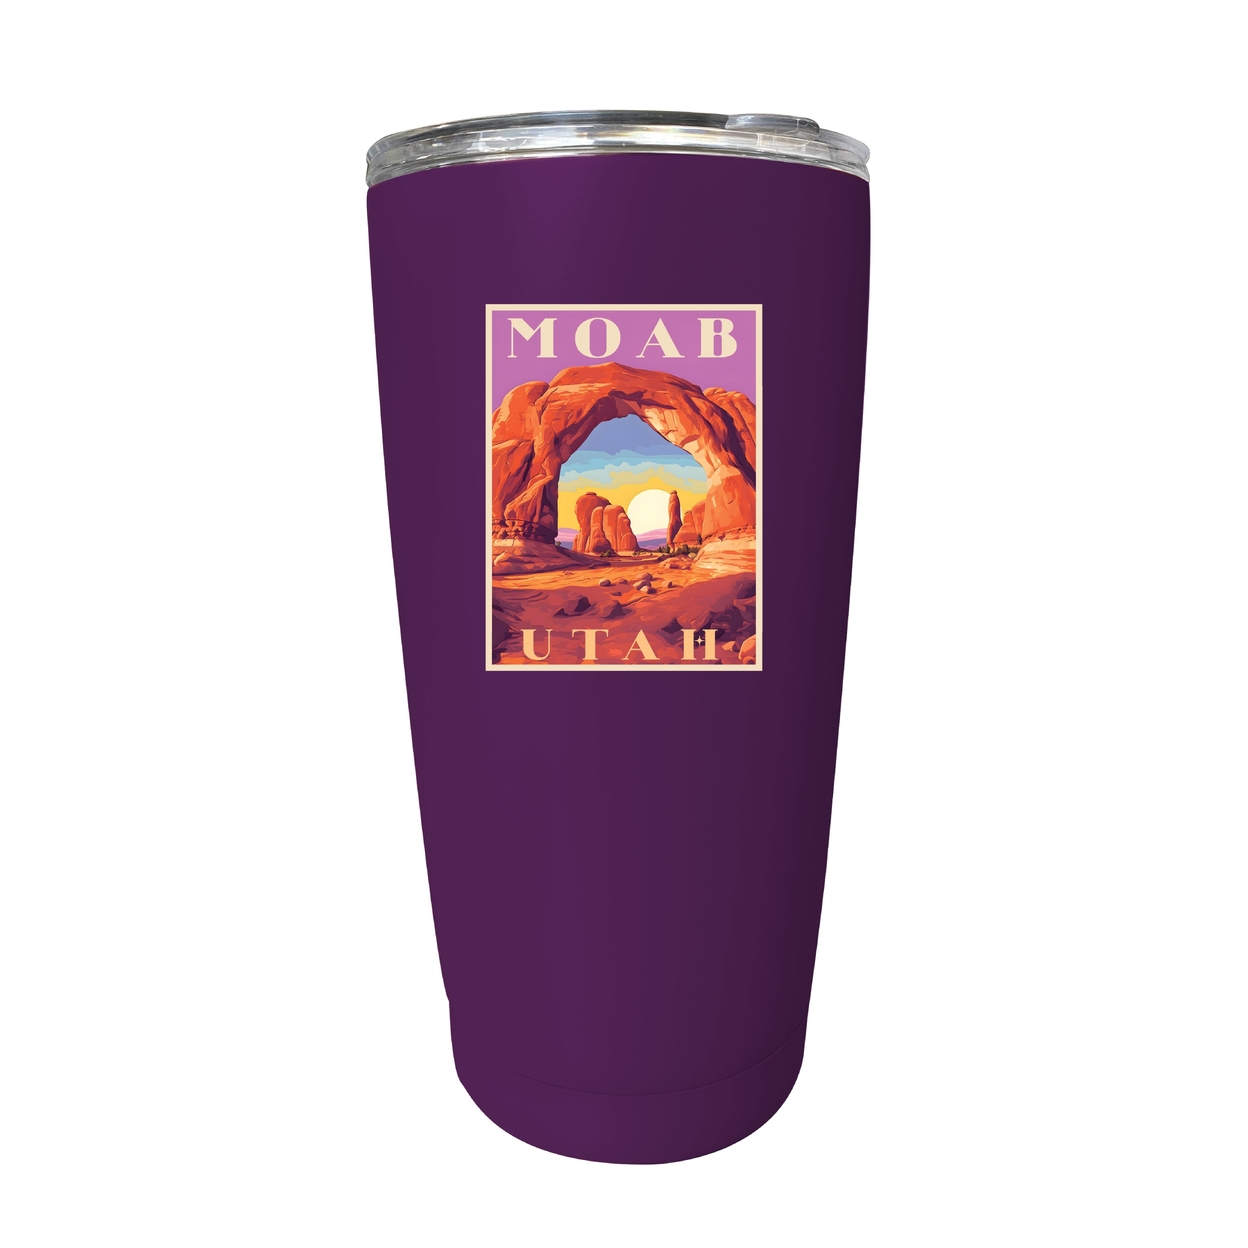 Moab Utah Souvenir 16 Oz Stainless Steel Insulated Tumbler - Pink,,4-Pack